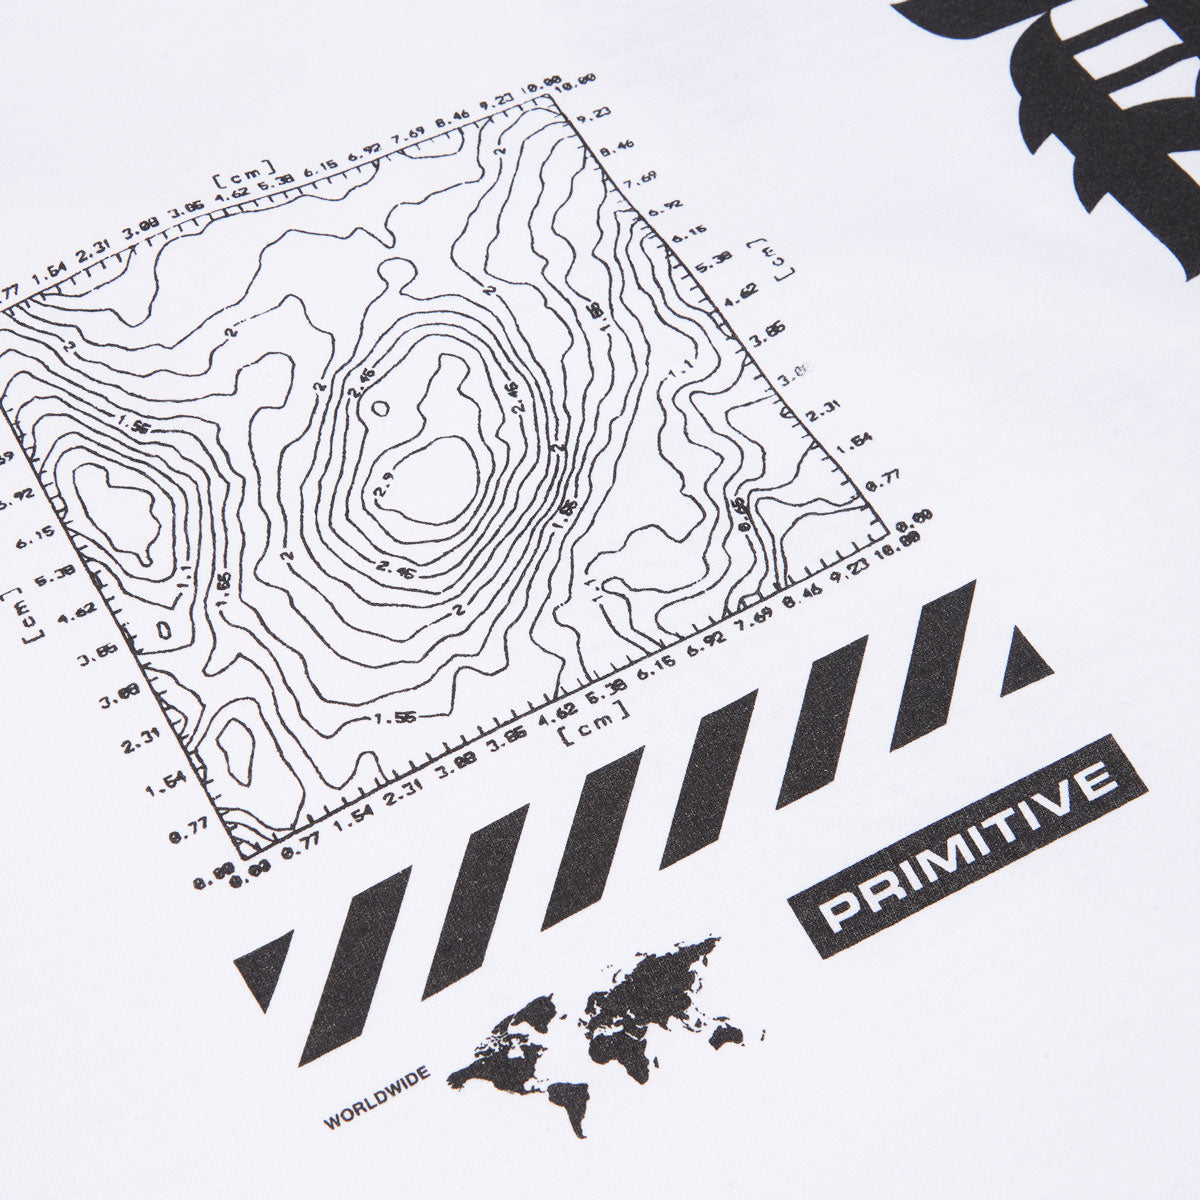 Primitive x Call Of Duty Mapping Dirty P T-Shirt - White image 3